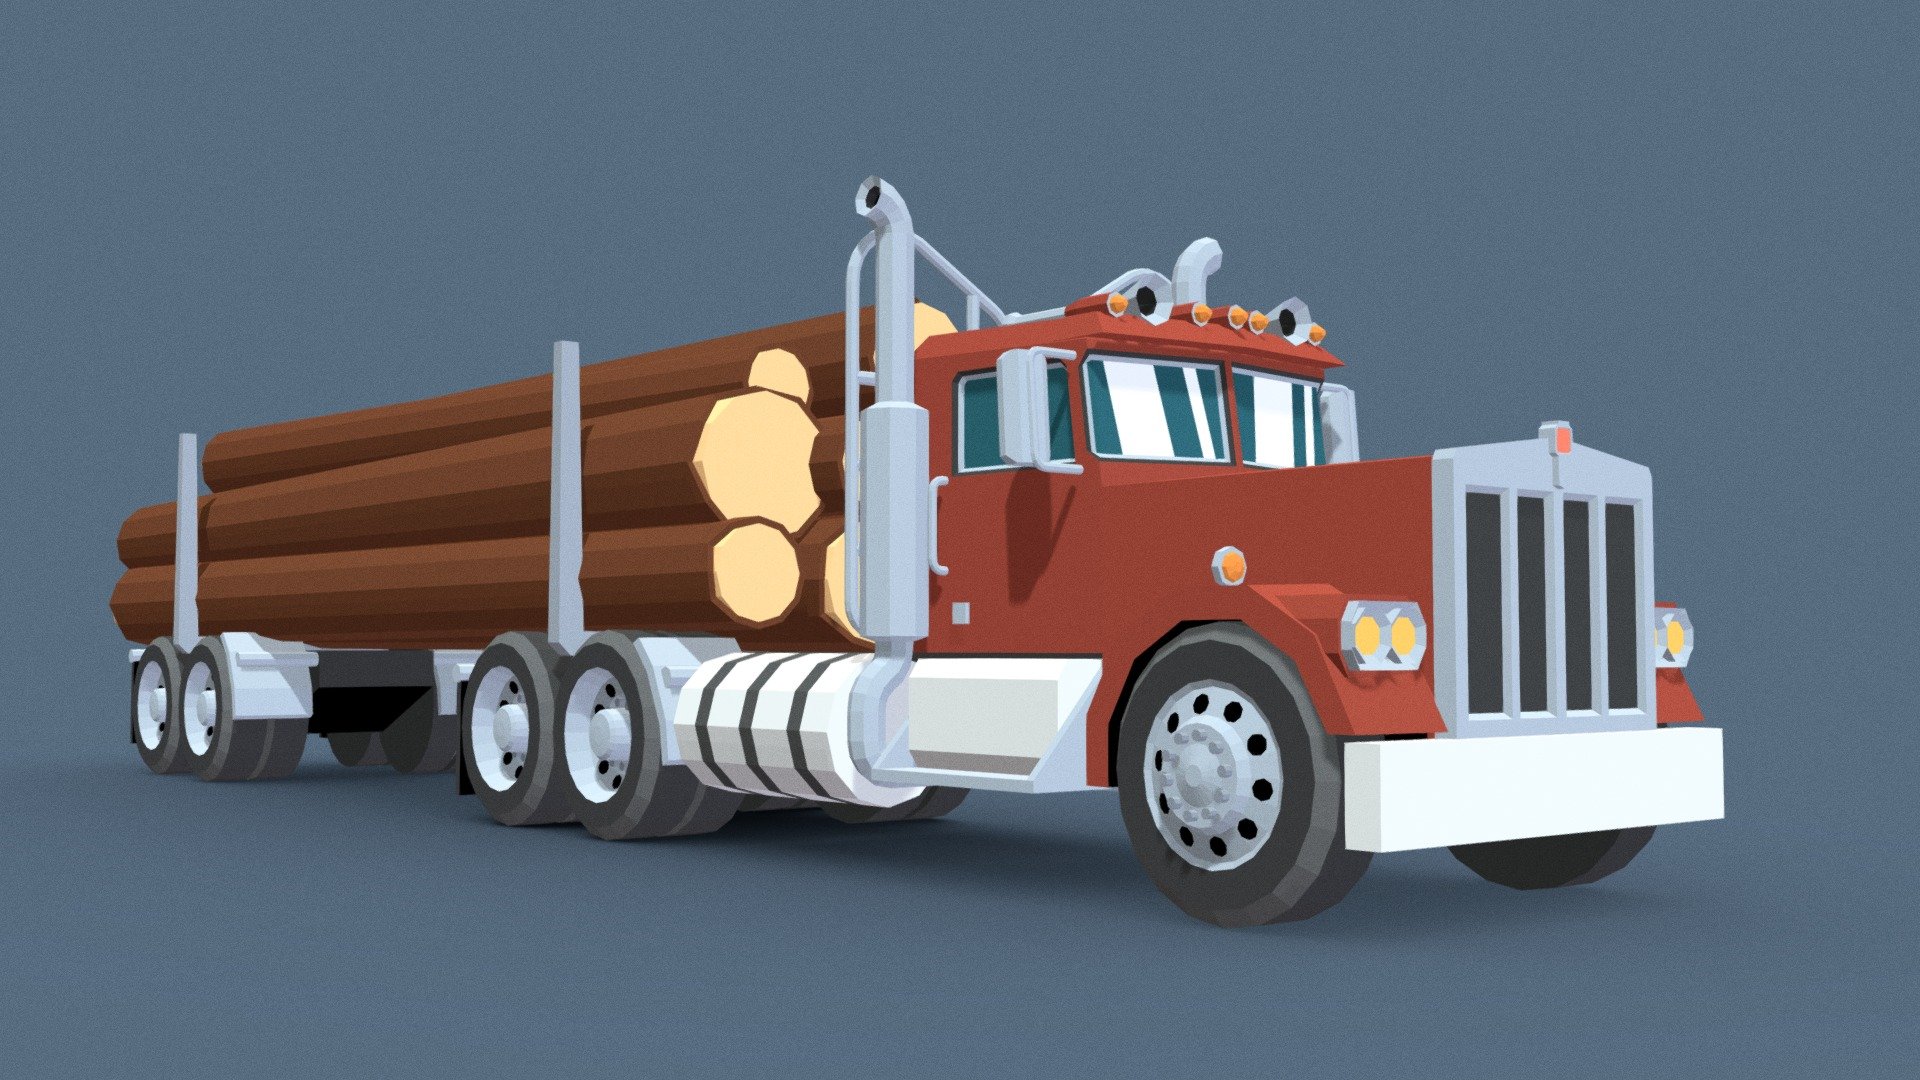 Low poly model of a Kenworth W-900 A 1973 Timber Carrier.

This is an asset for my upcoming mobile game Double Rocks. The game setting is inspired by the “Twin Peaks” series and this model is a reference to the Leo Johnson’s truck that can be seen in the pilot episode.

The model is flat shaded low poly colored with a texture. Can be easily recolored. Optimized for mobile games 3d model